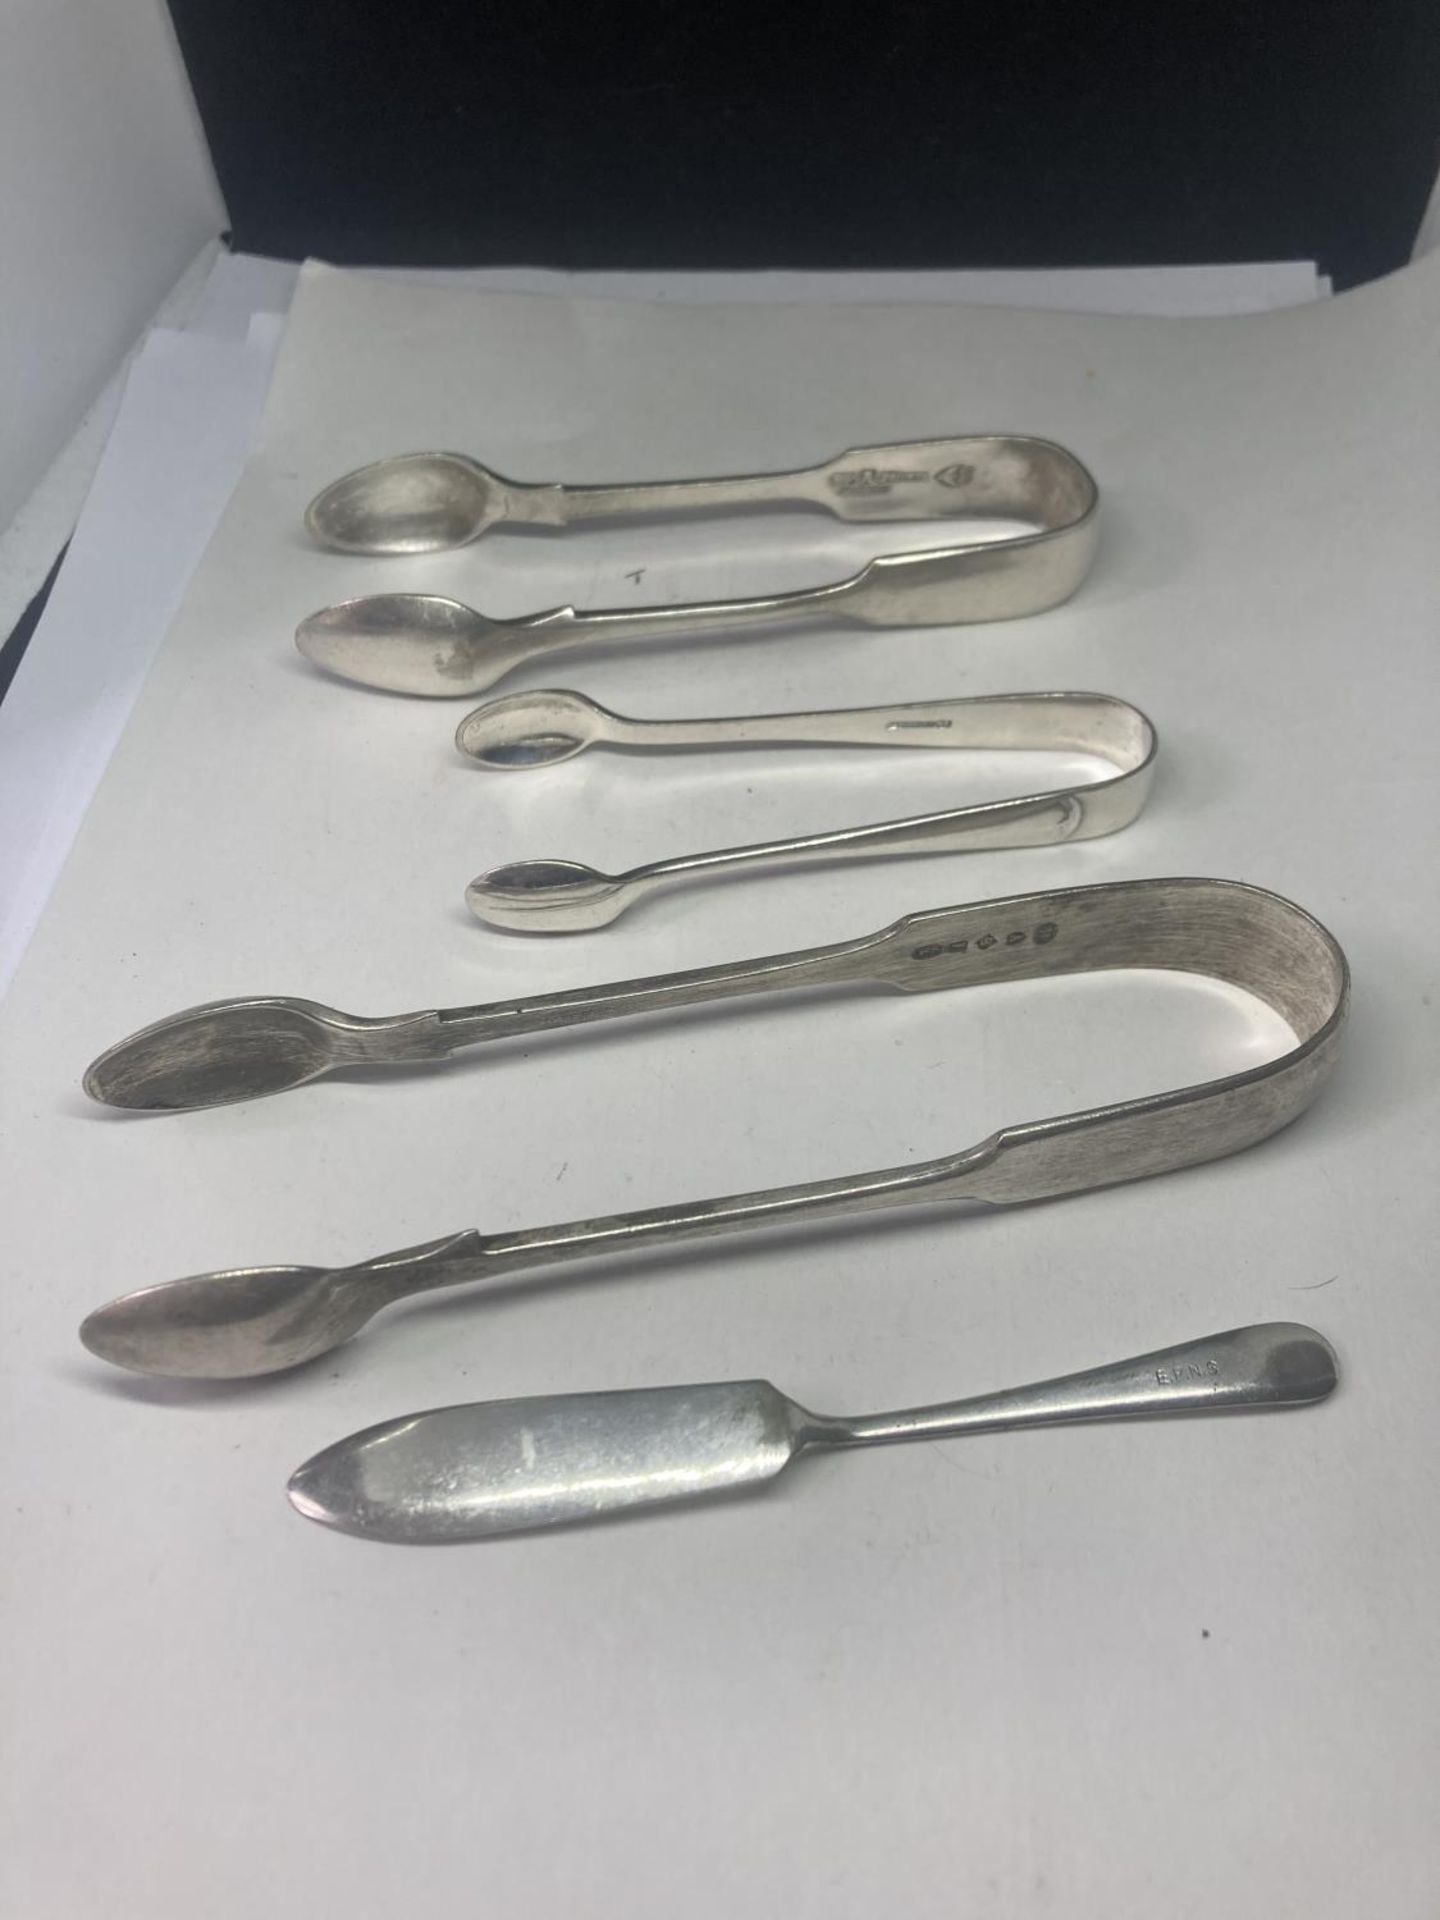 FOUE SILVER PLATED ITEMS TO INCLUDE THREE SETS OF NIPS AND A BUTTER KNIFE - Image 4 of 4